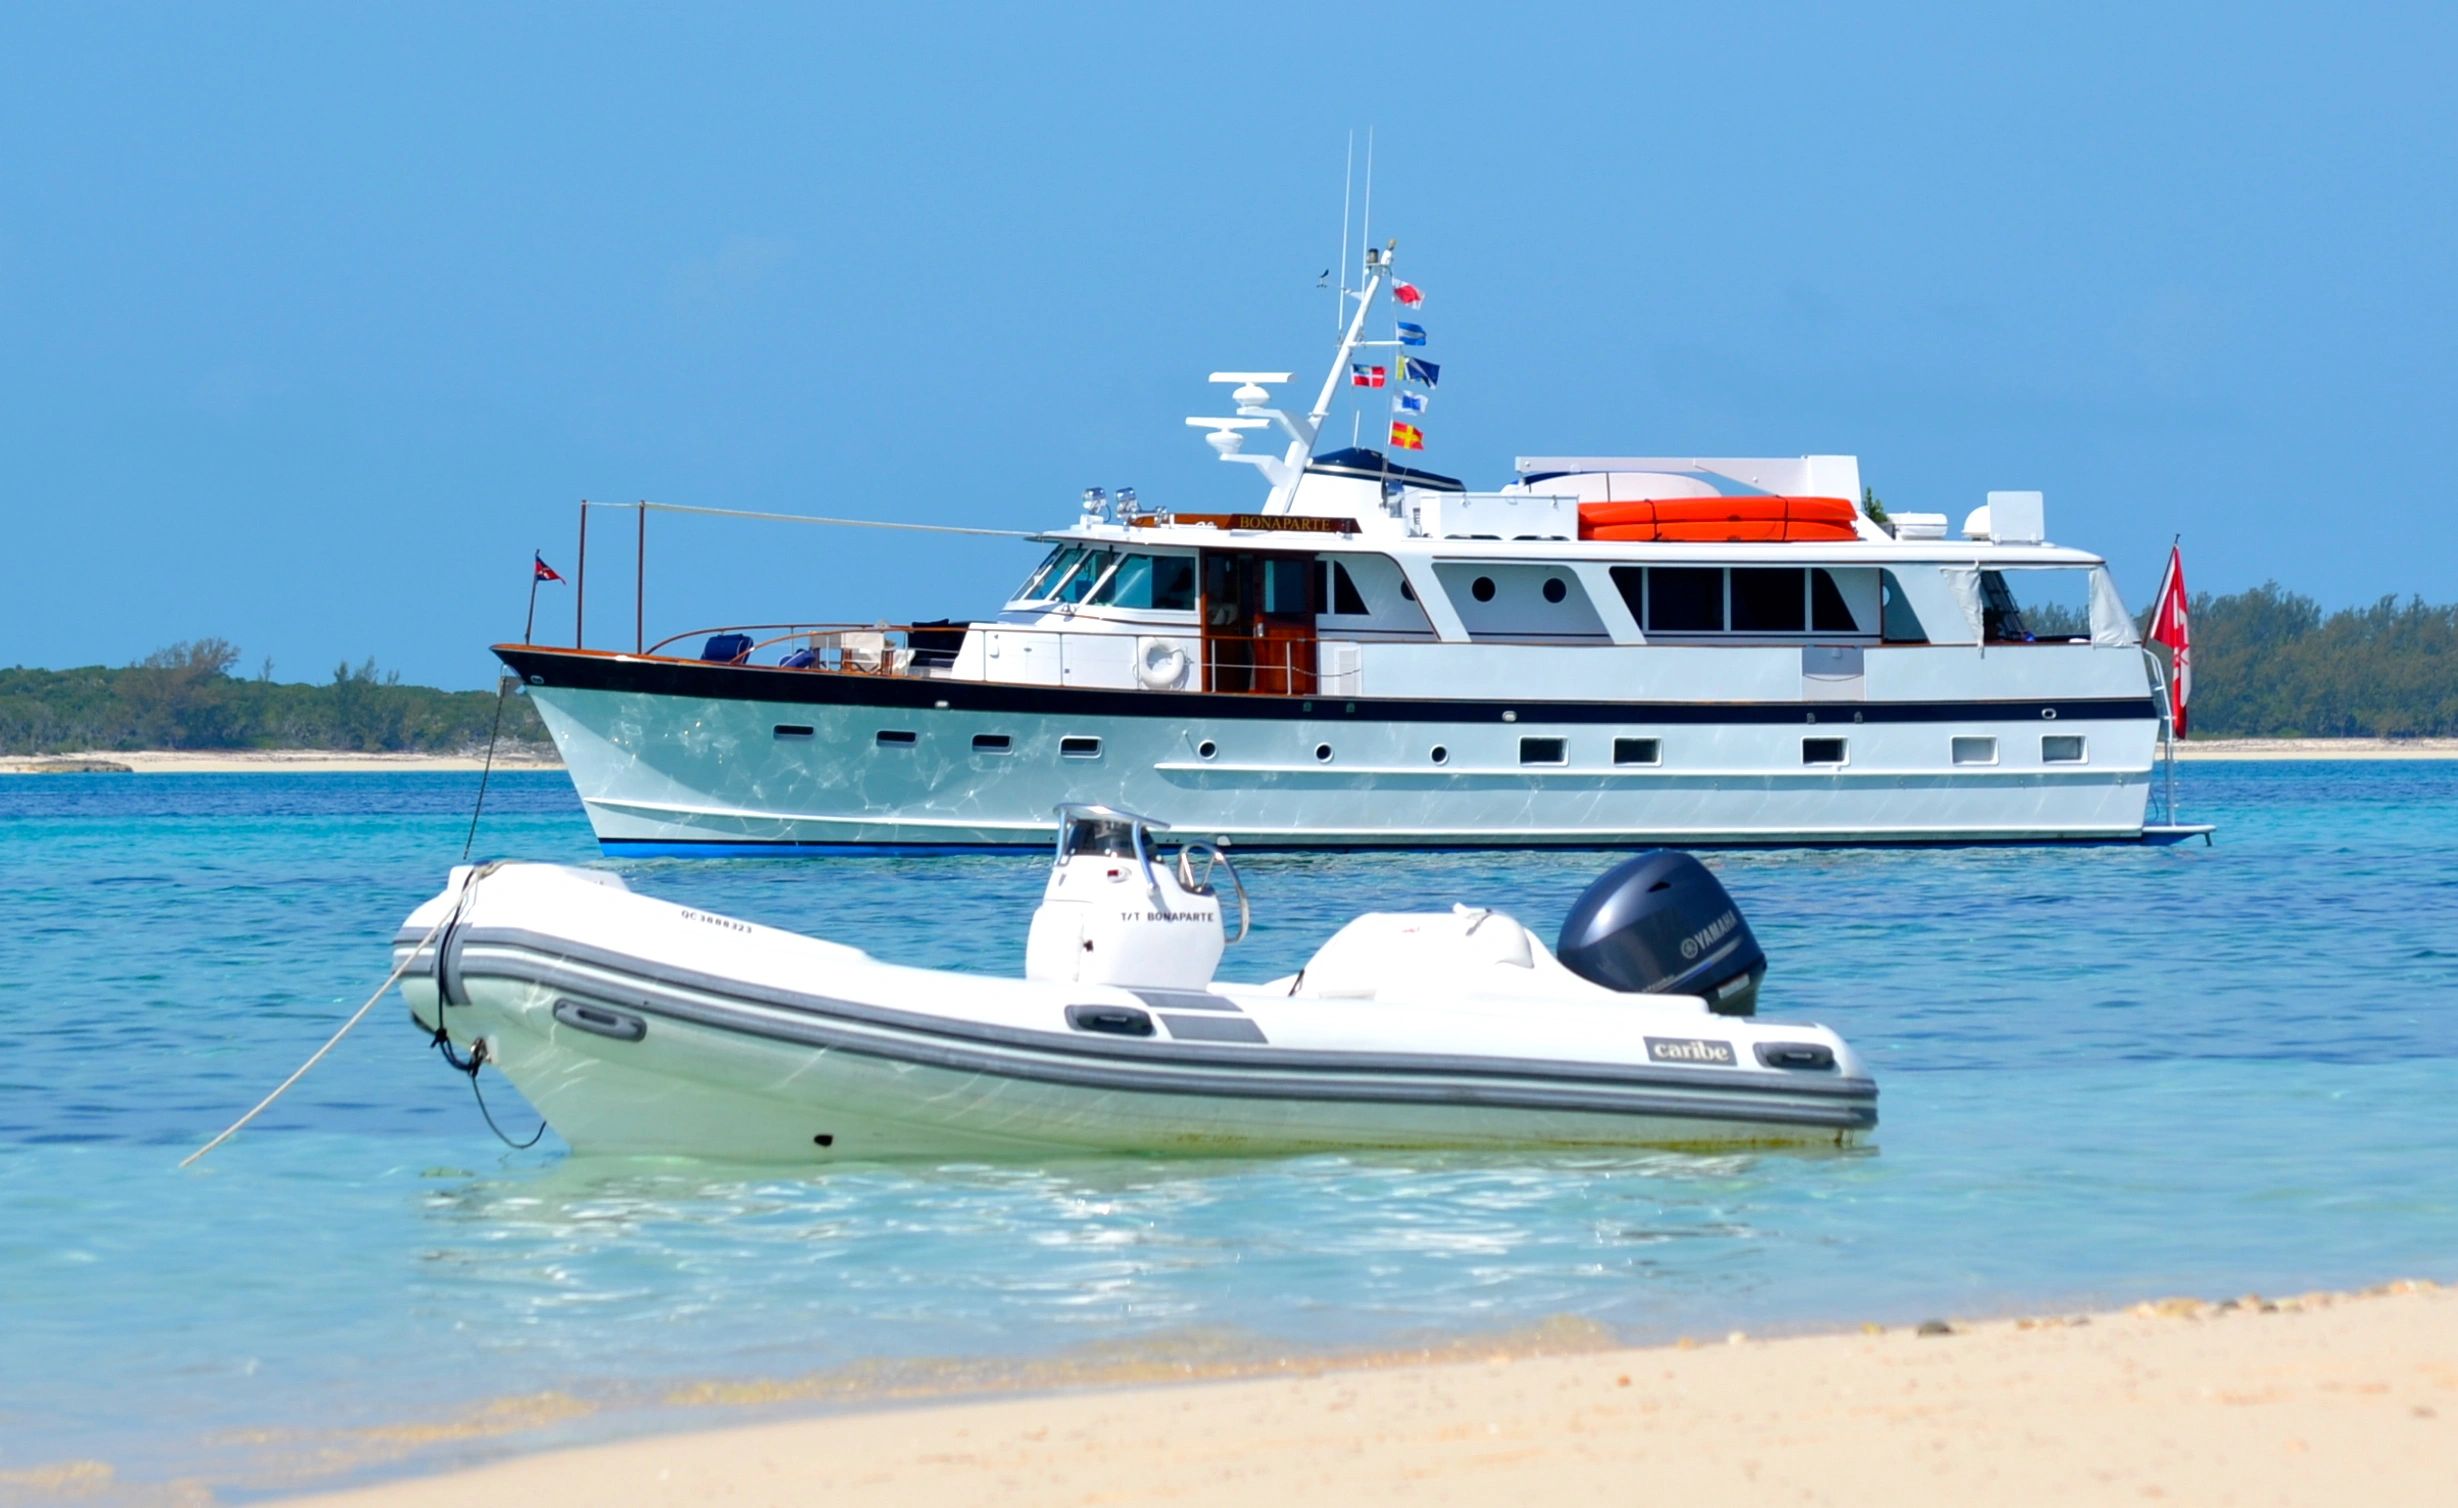 Private Yacht Charter Bahamas Week Yacht Bahamas Charter yacht bahamas